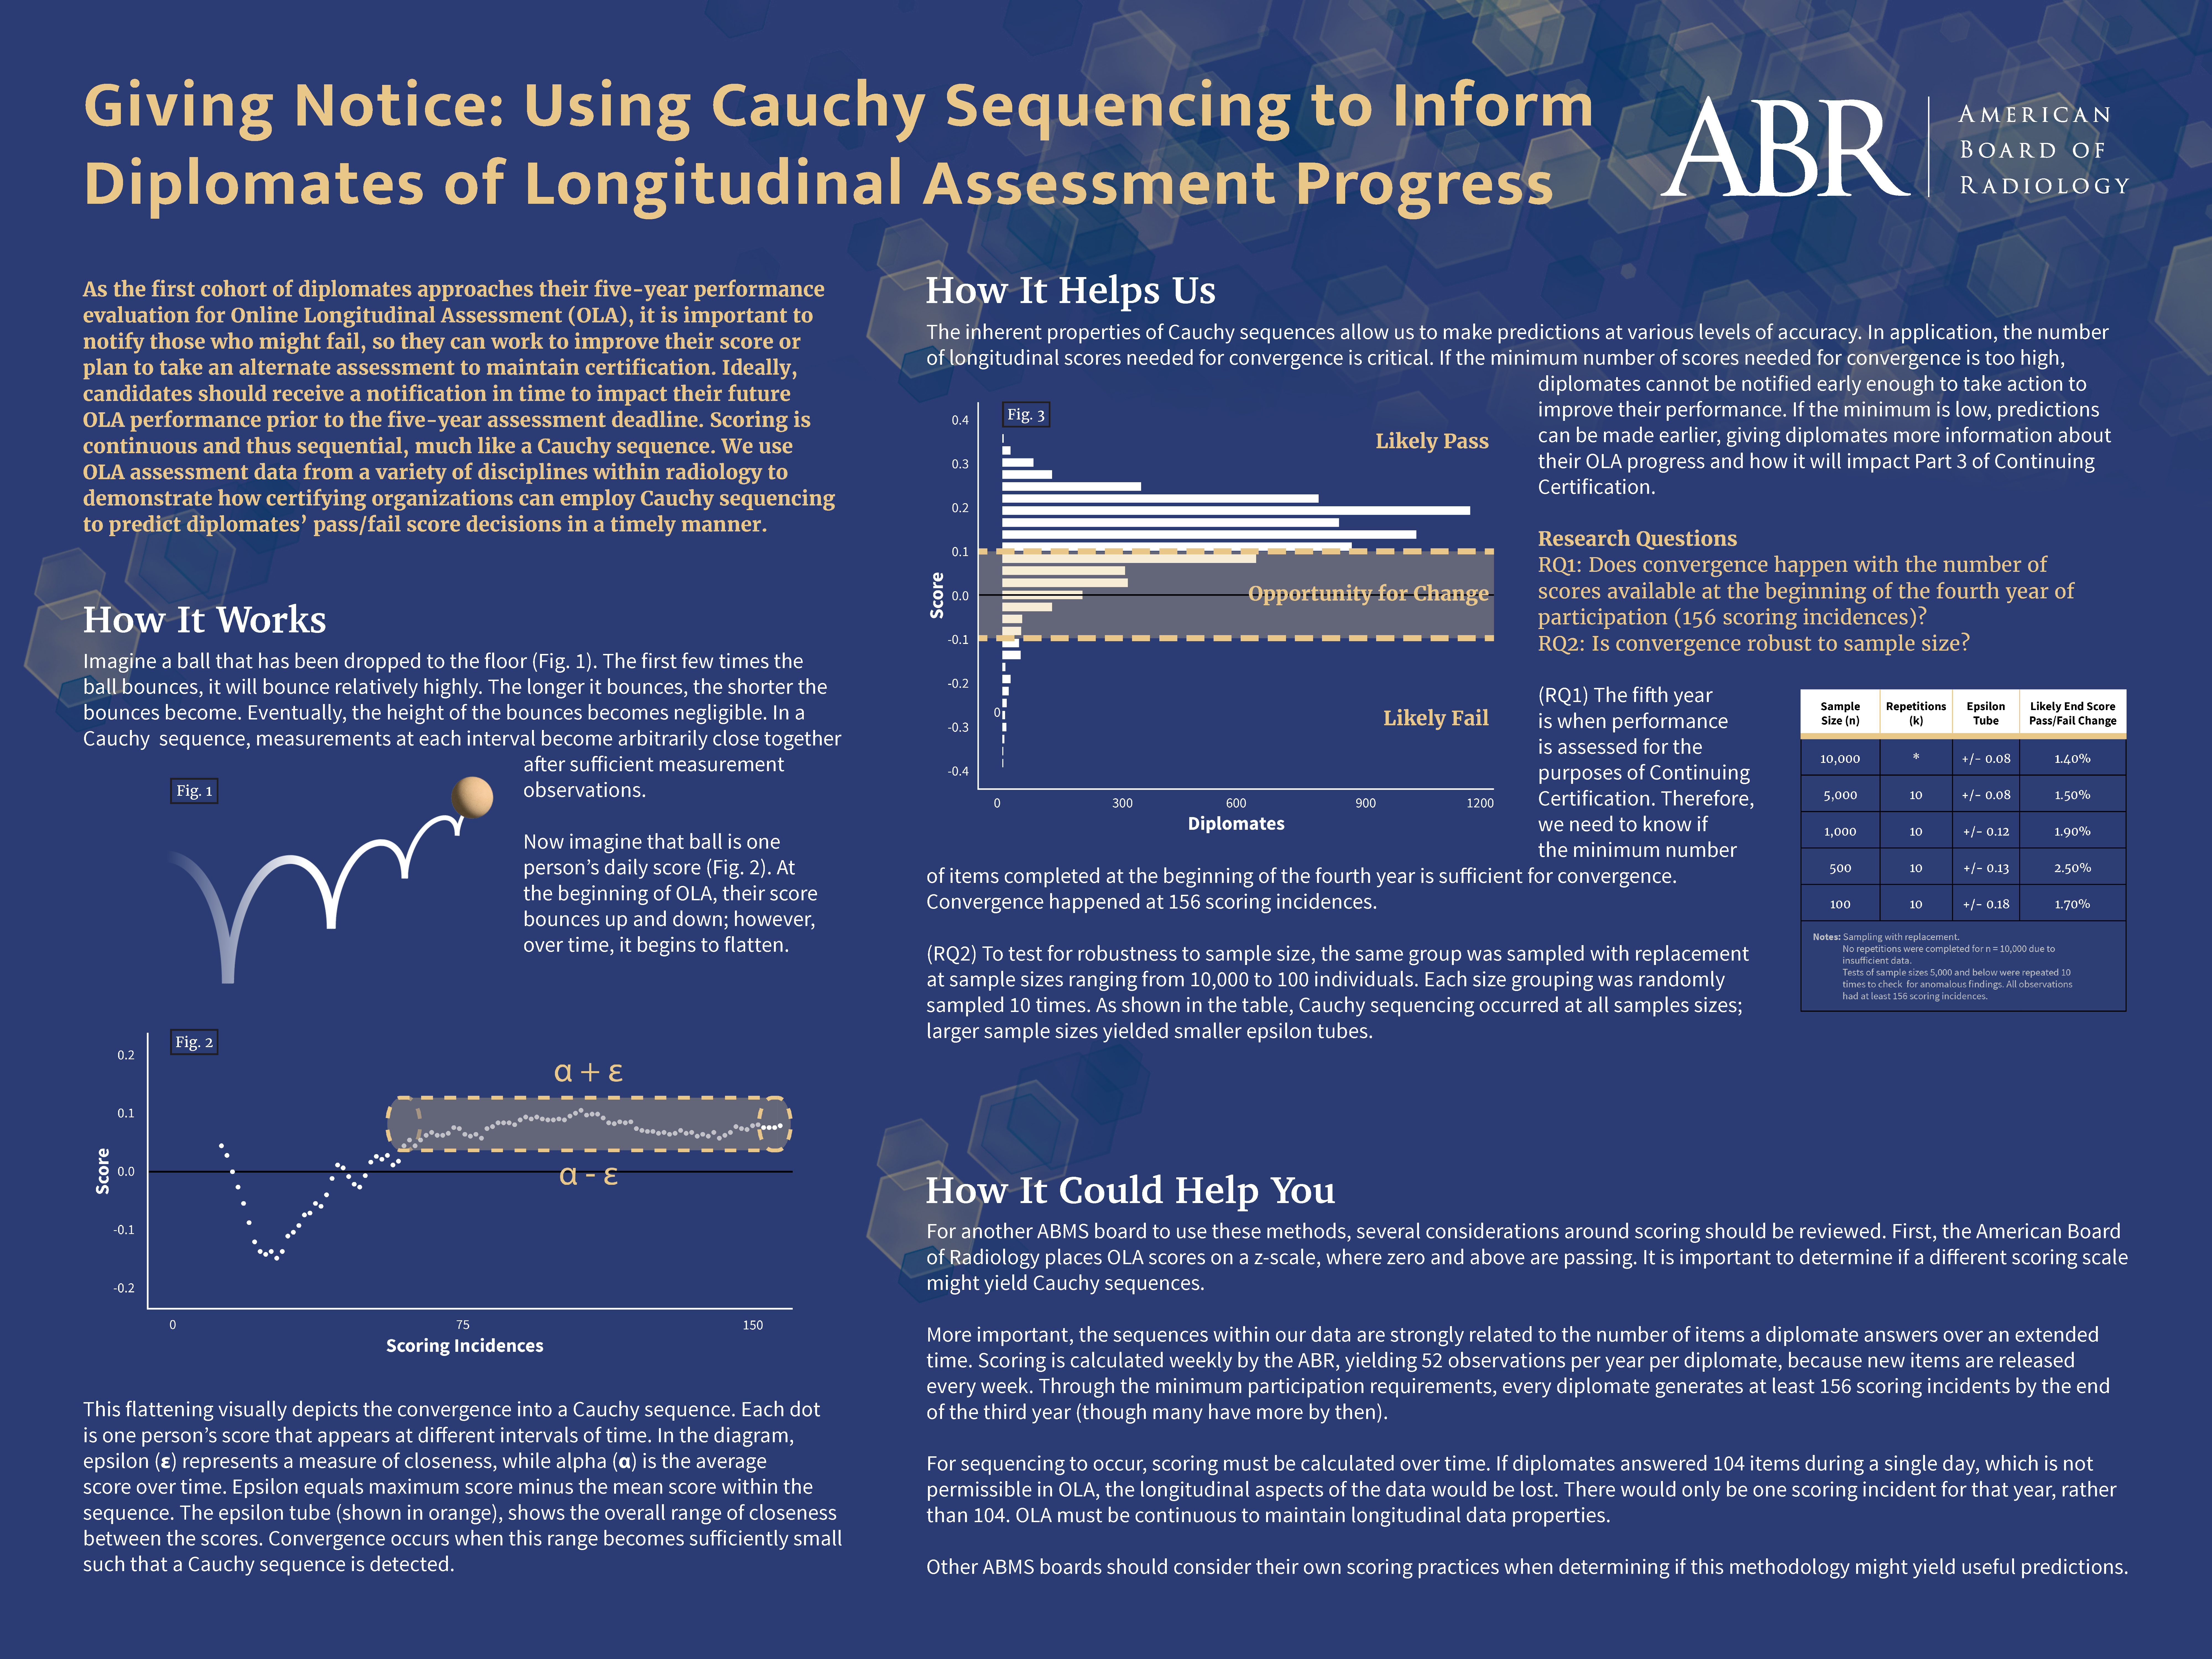 ABR poster about Cauchy sequencing